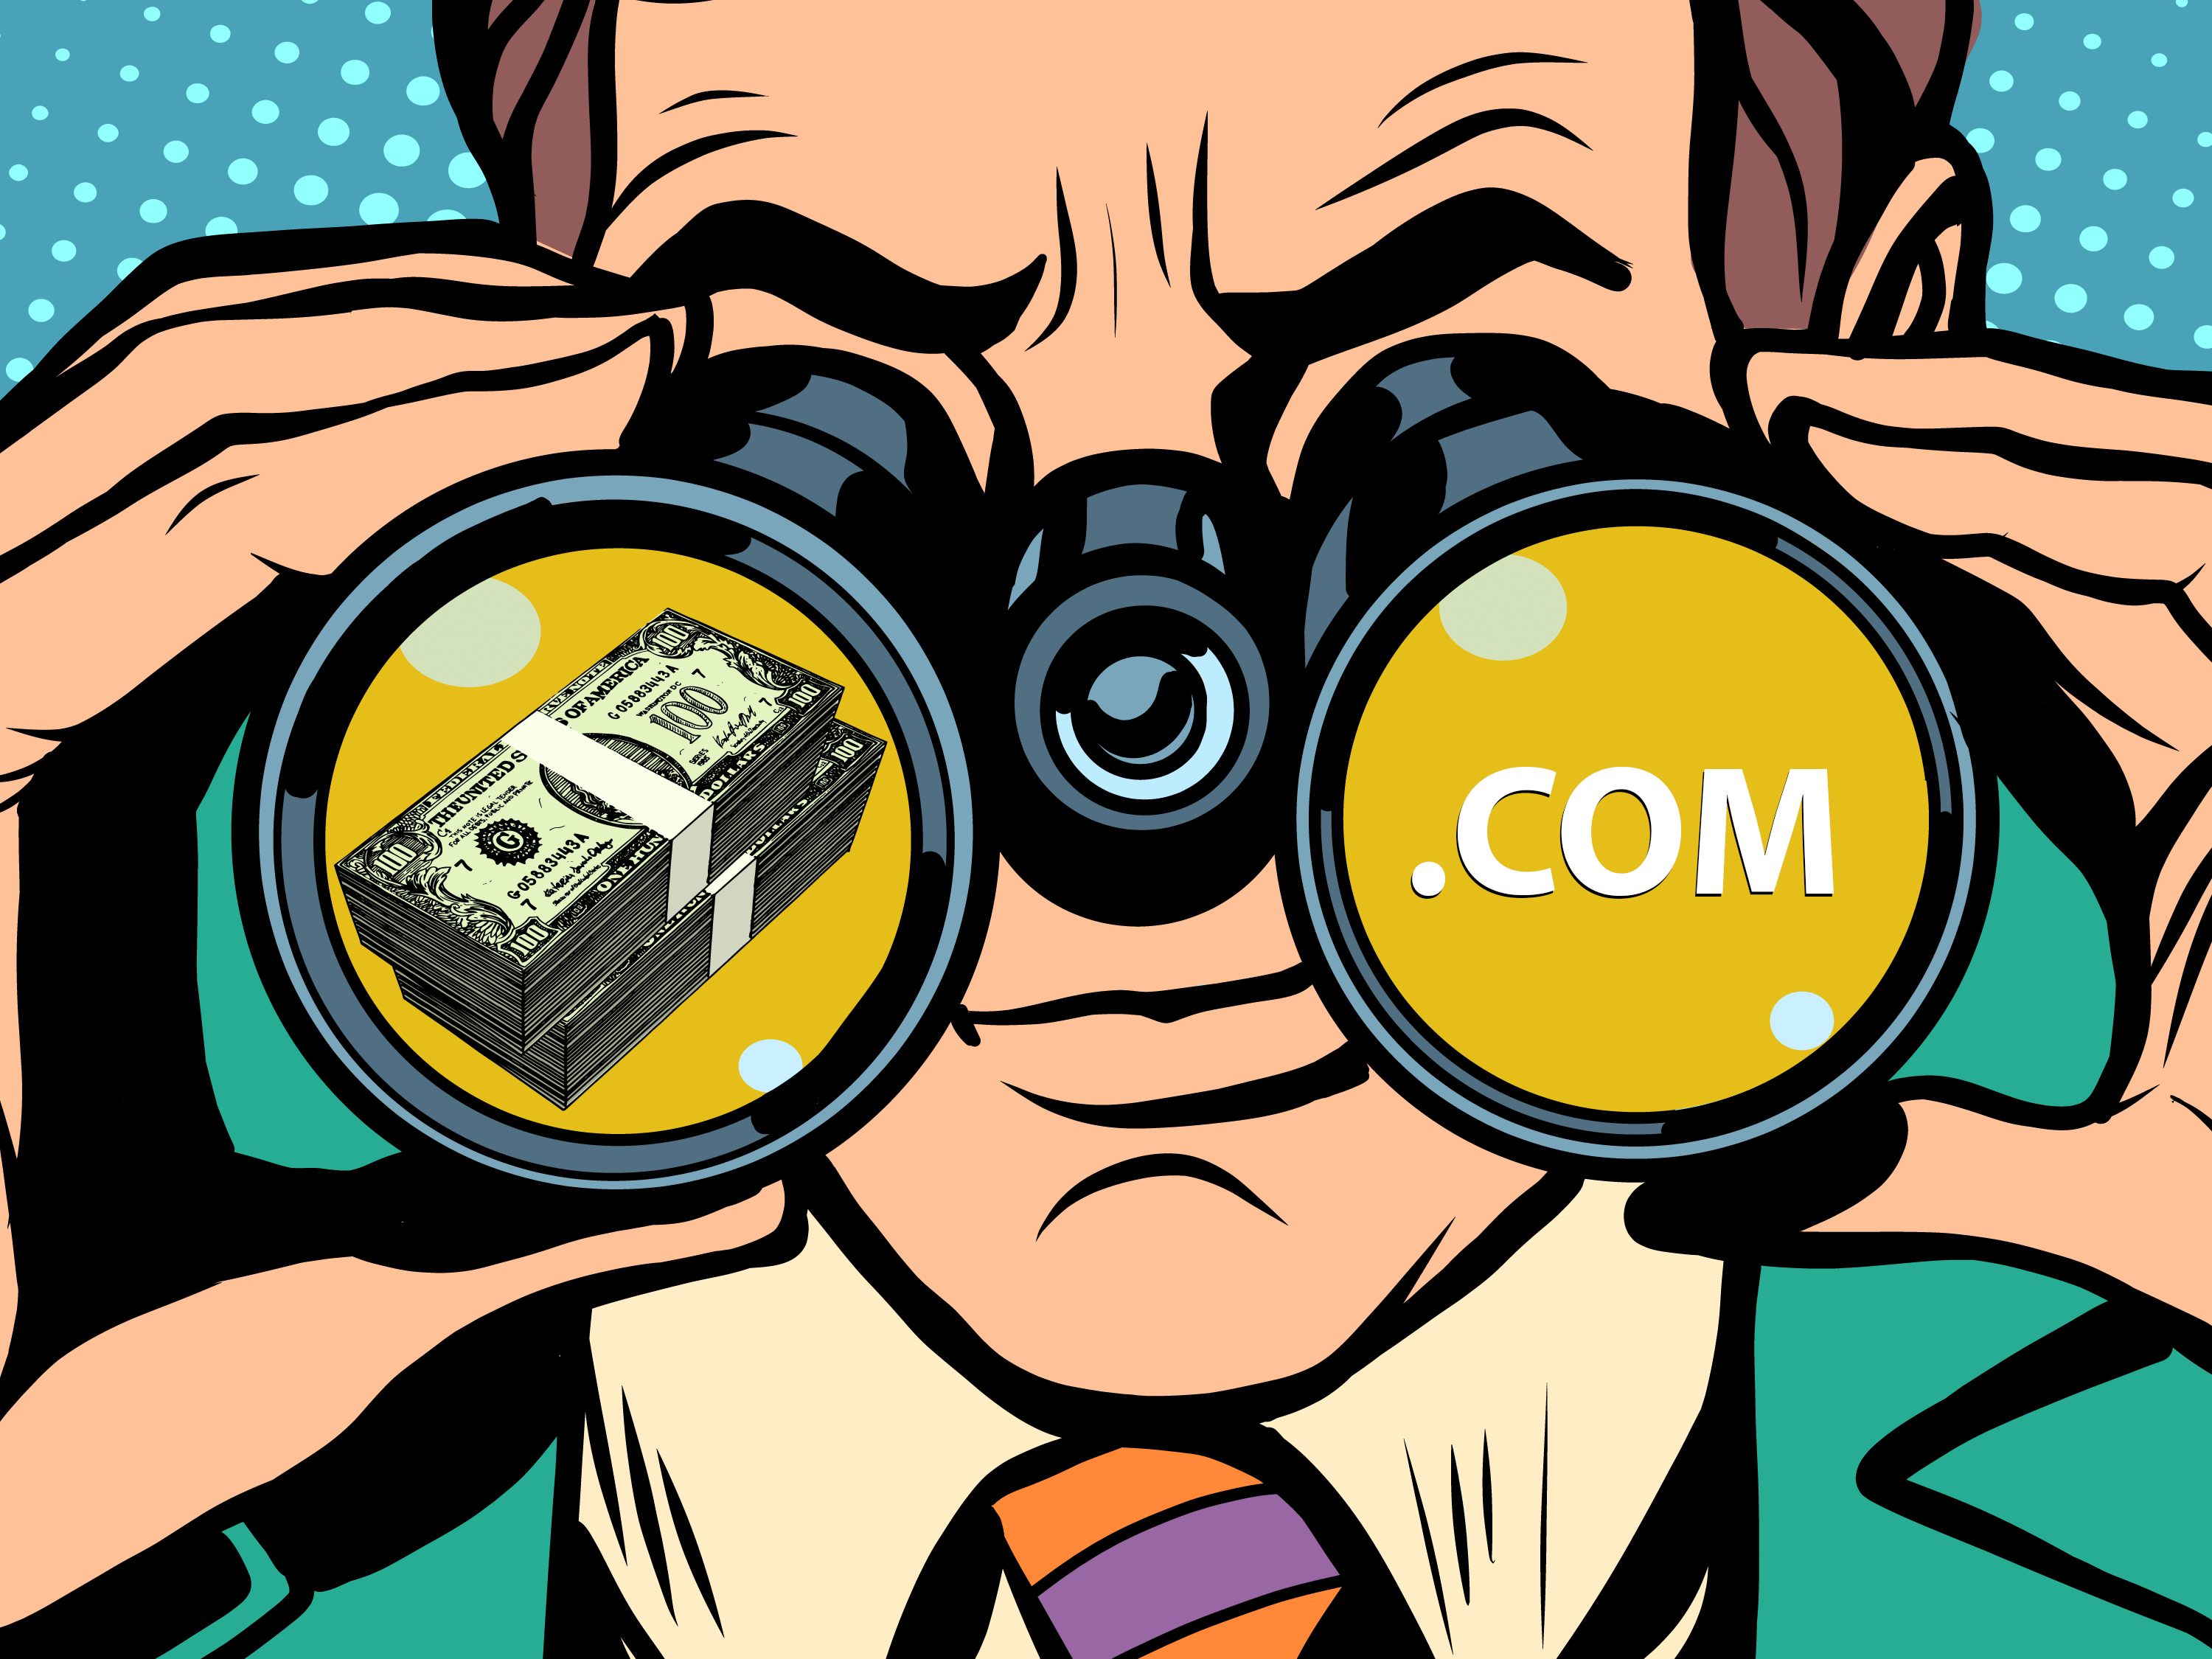 Should Domainers share purchase price when discussing domain sales publicly?